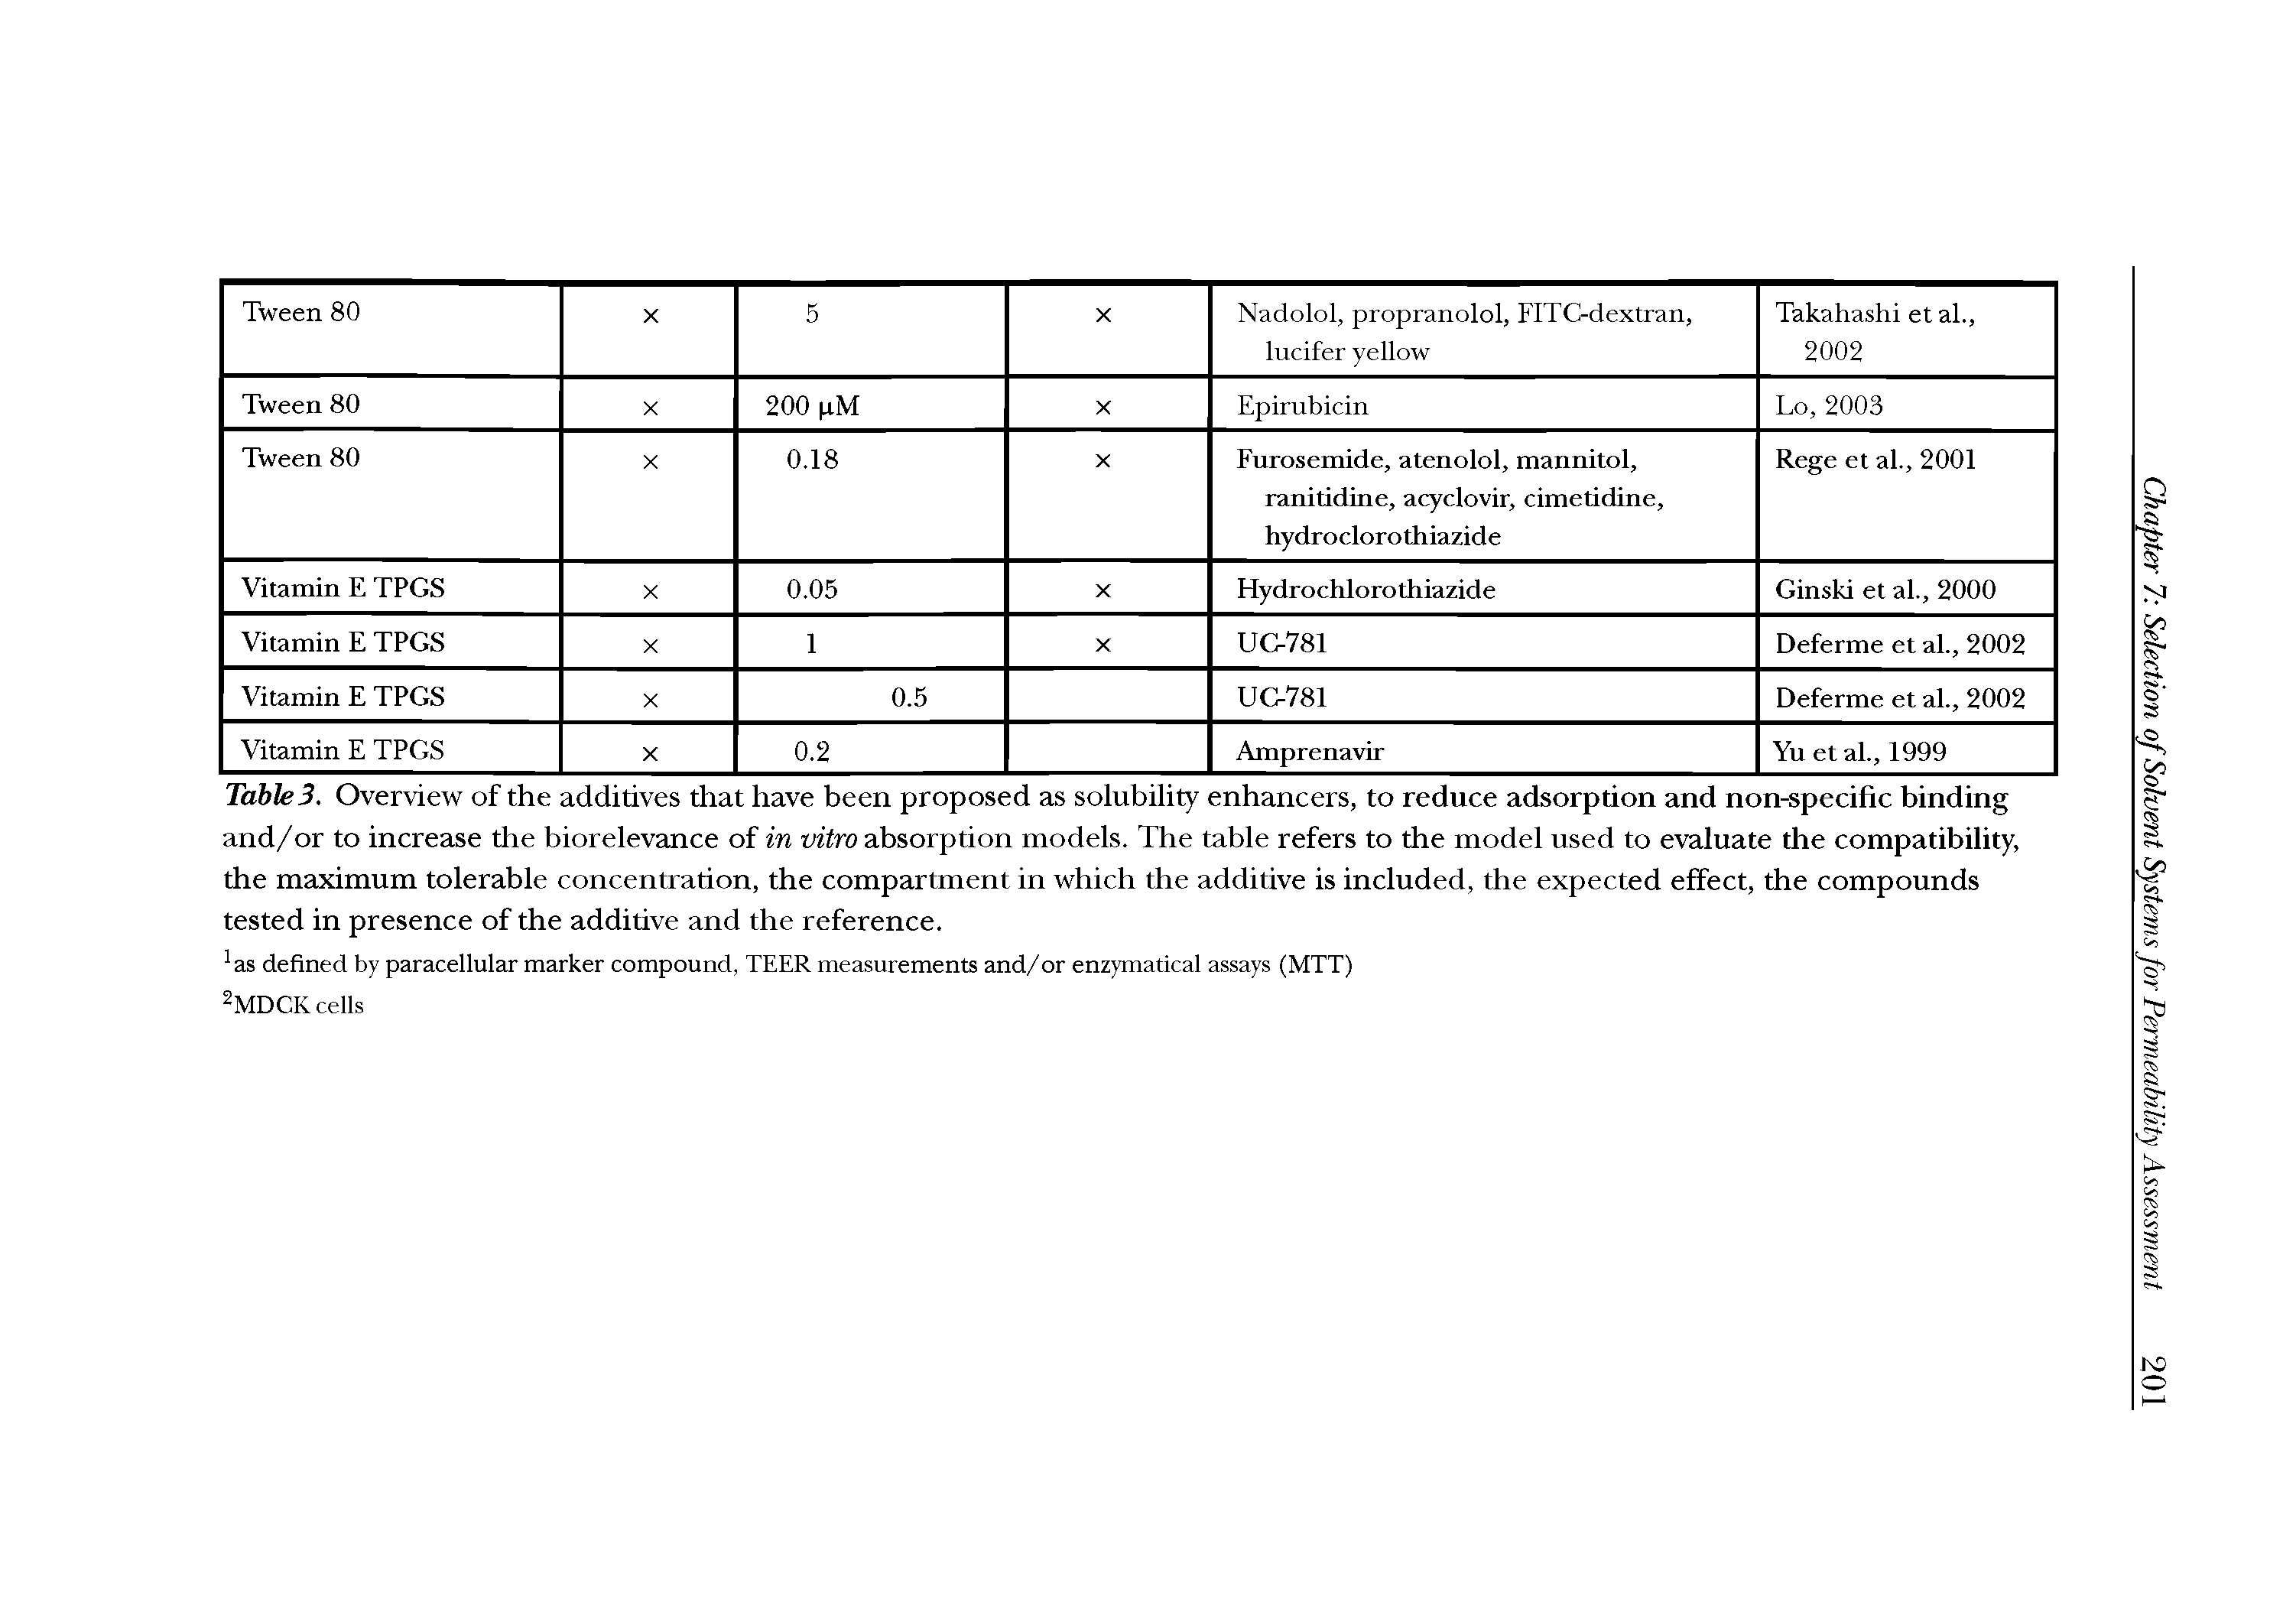 Table 3. Overview of the additives that have been proposed as solubility enhancers, to reduce adsorption and non-specific binding and/or to increase the biorelevance of in vitro absorption models. The table refers to the model used to evaluate the compatibility, the maximum tolerable concentration, the compartment in which the additive is included, the expected effect, the compounds tested in presence of the additive and the reference.